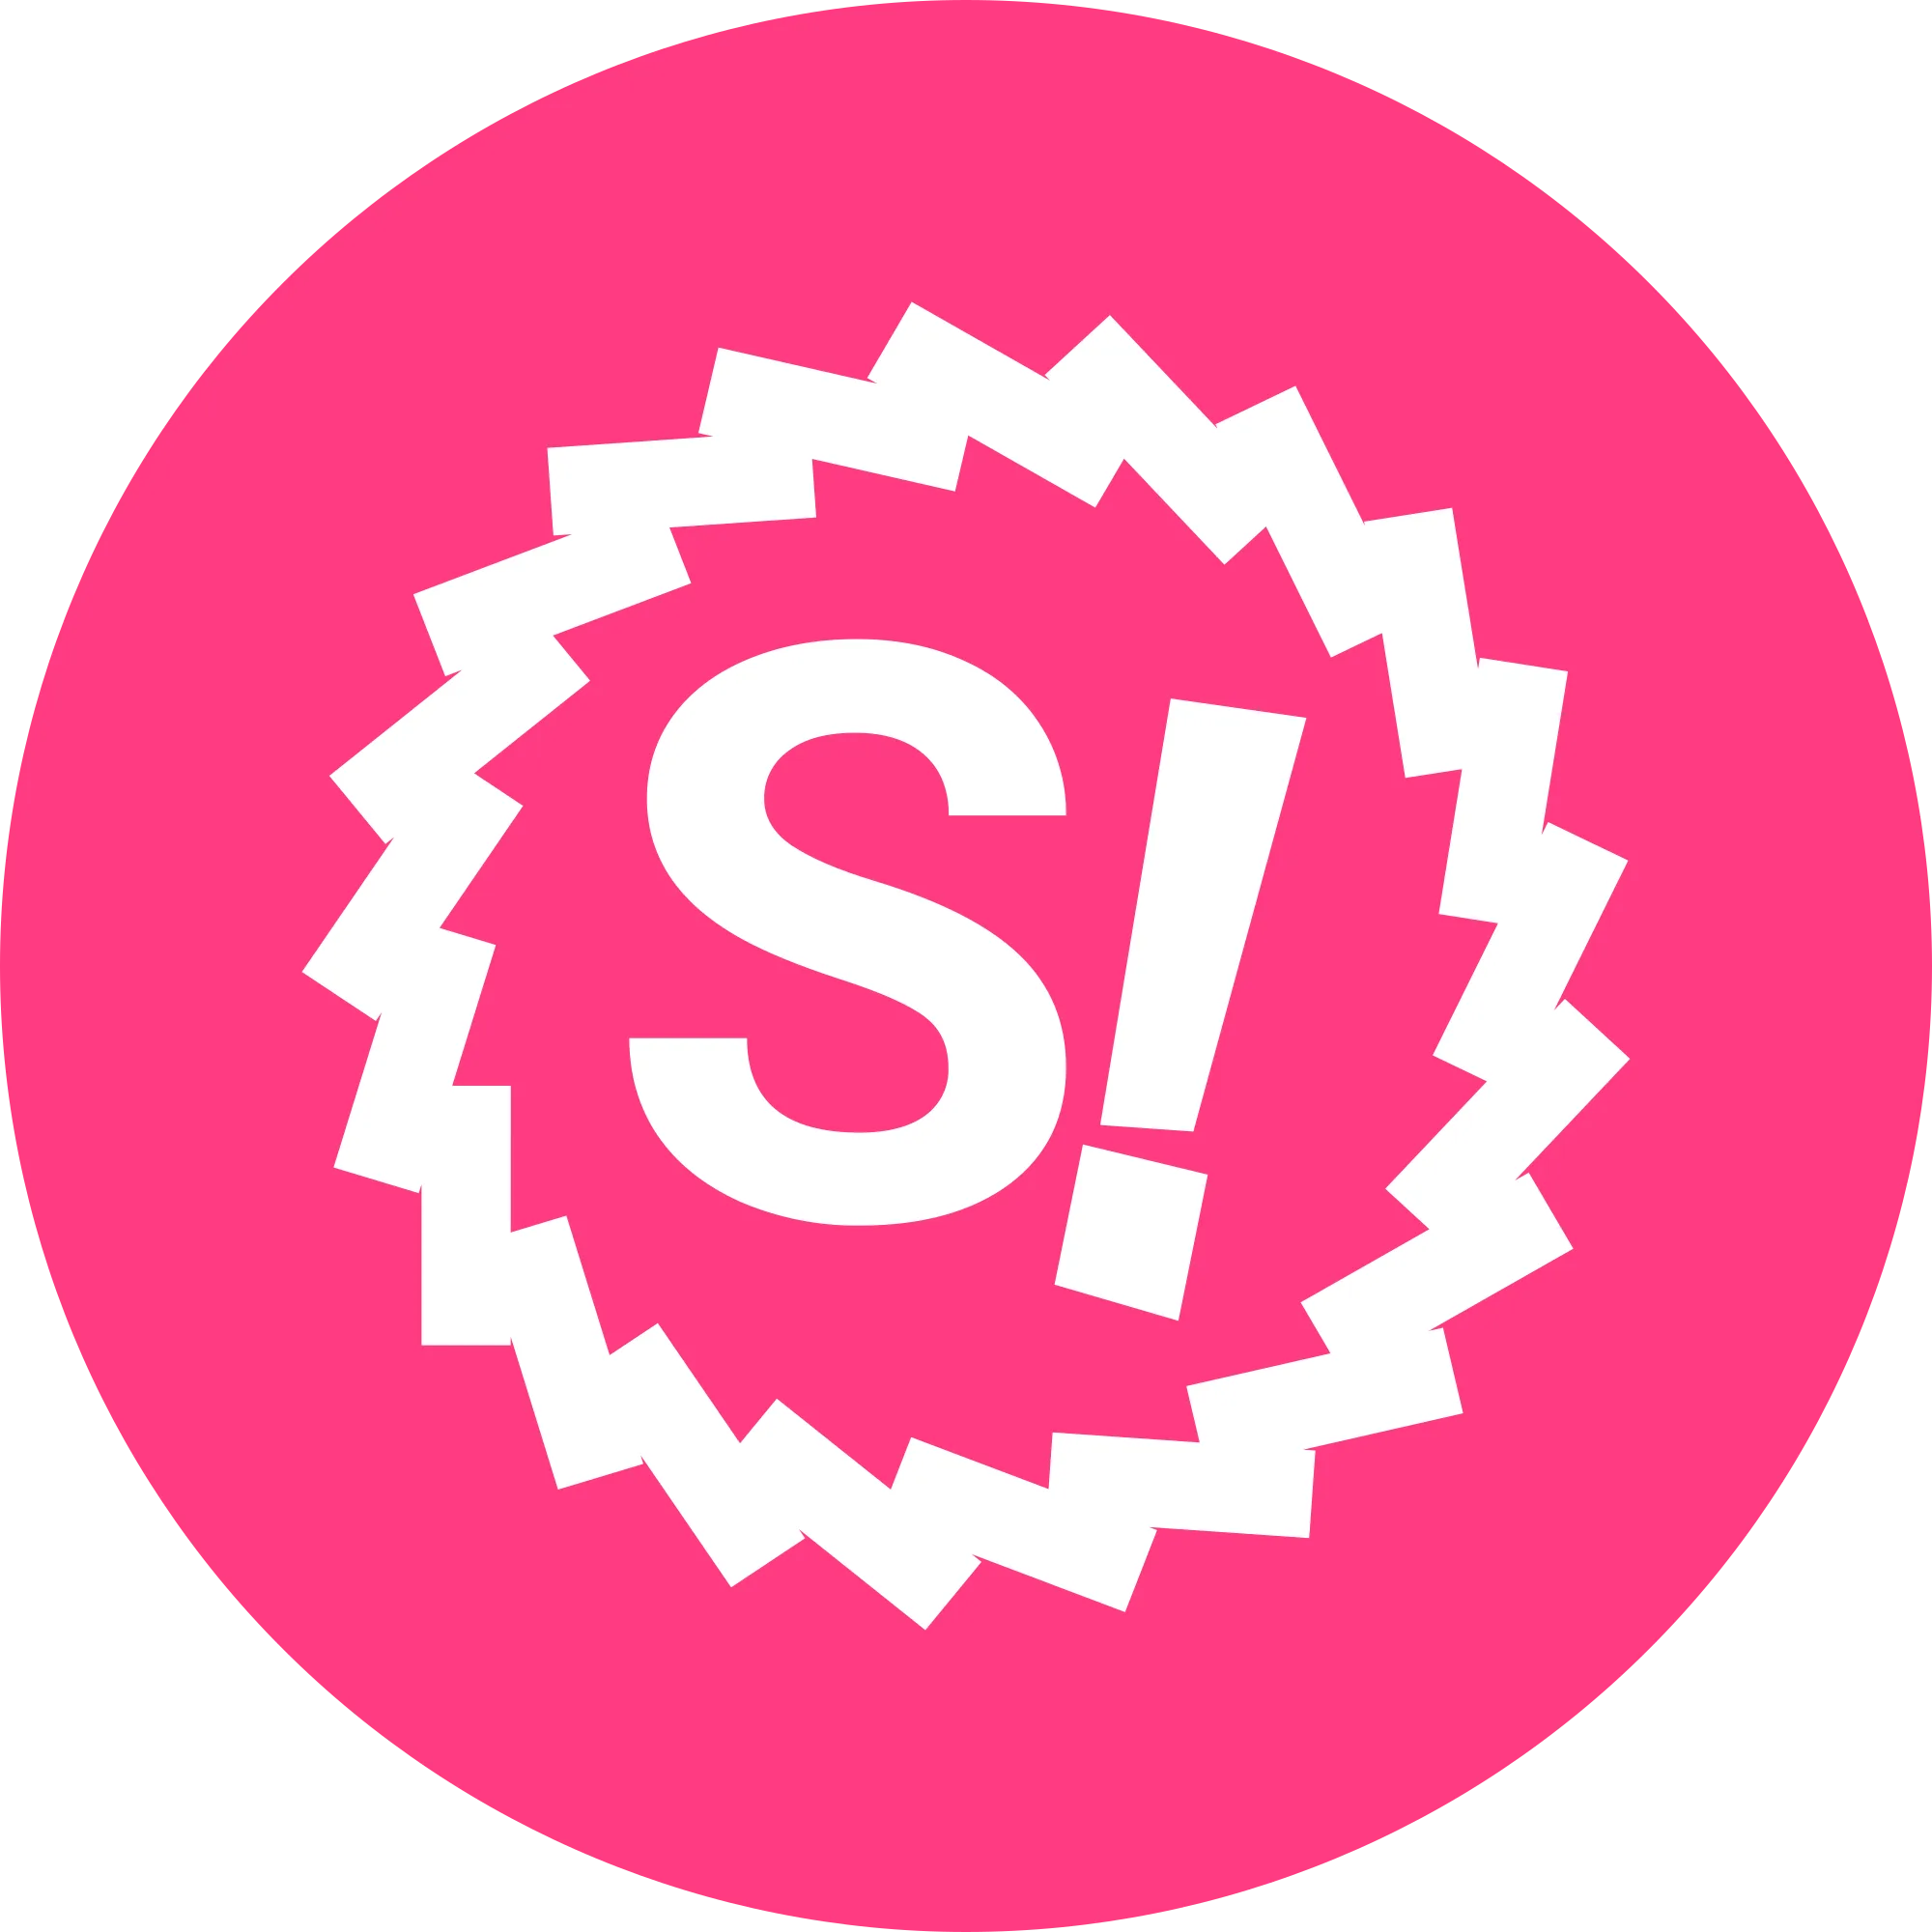 SpankChain logo in png format